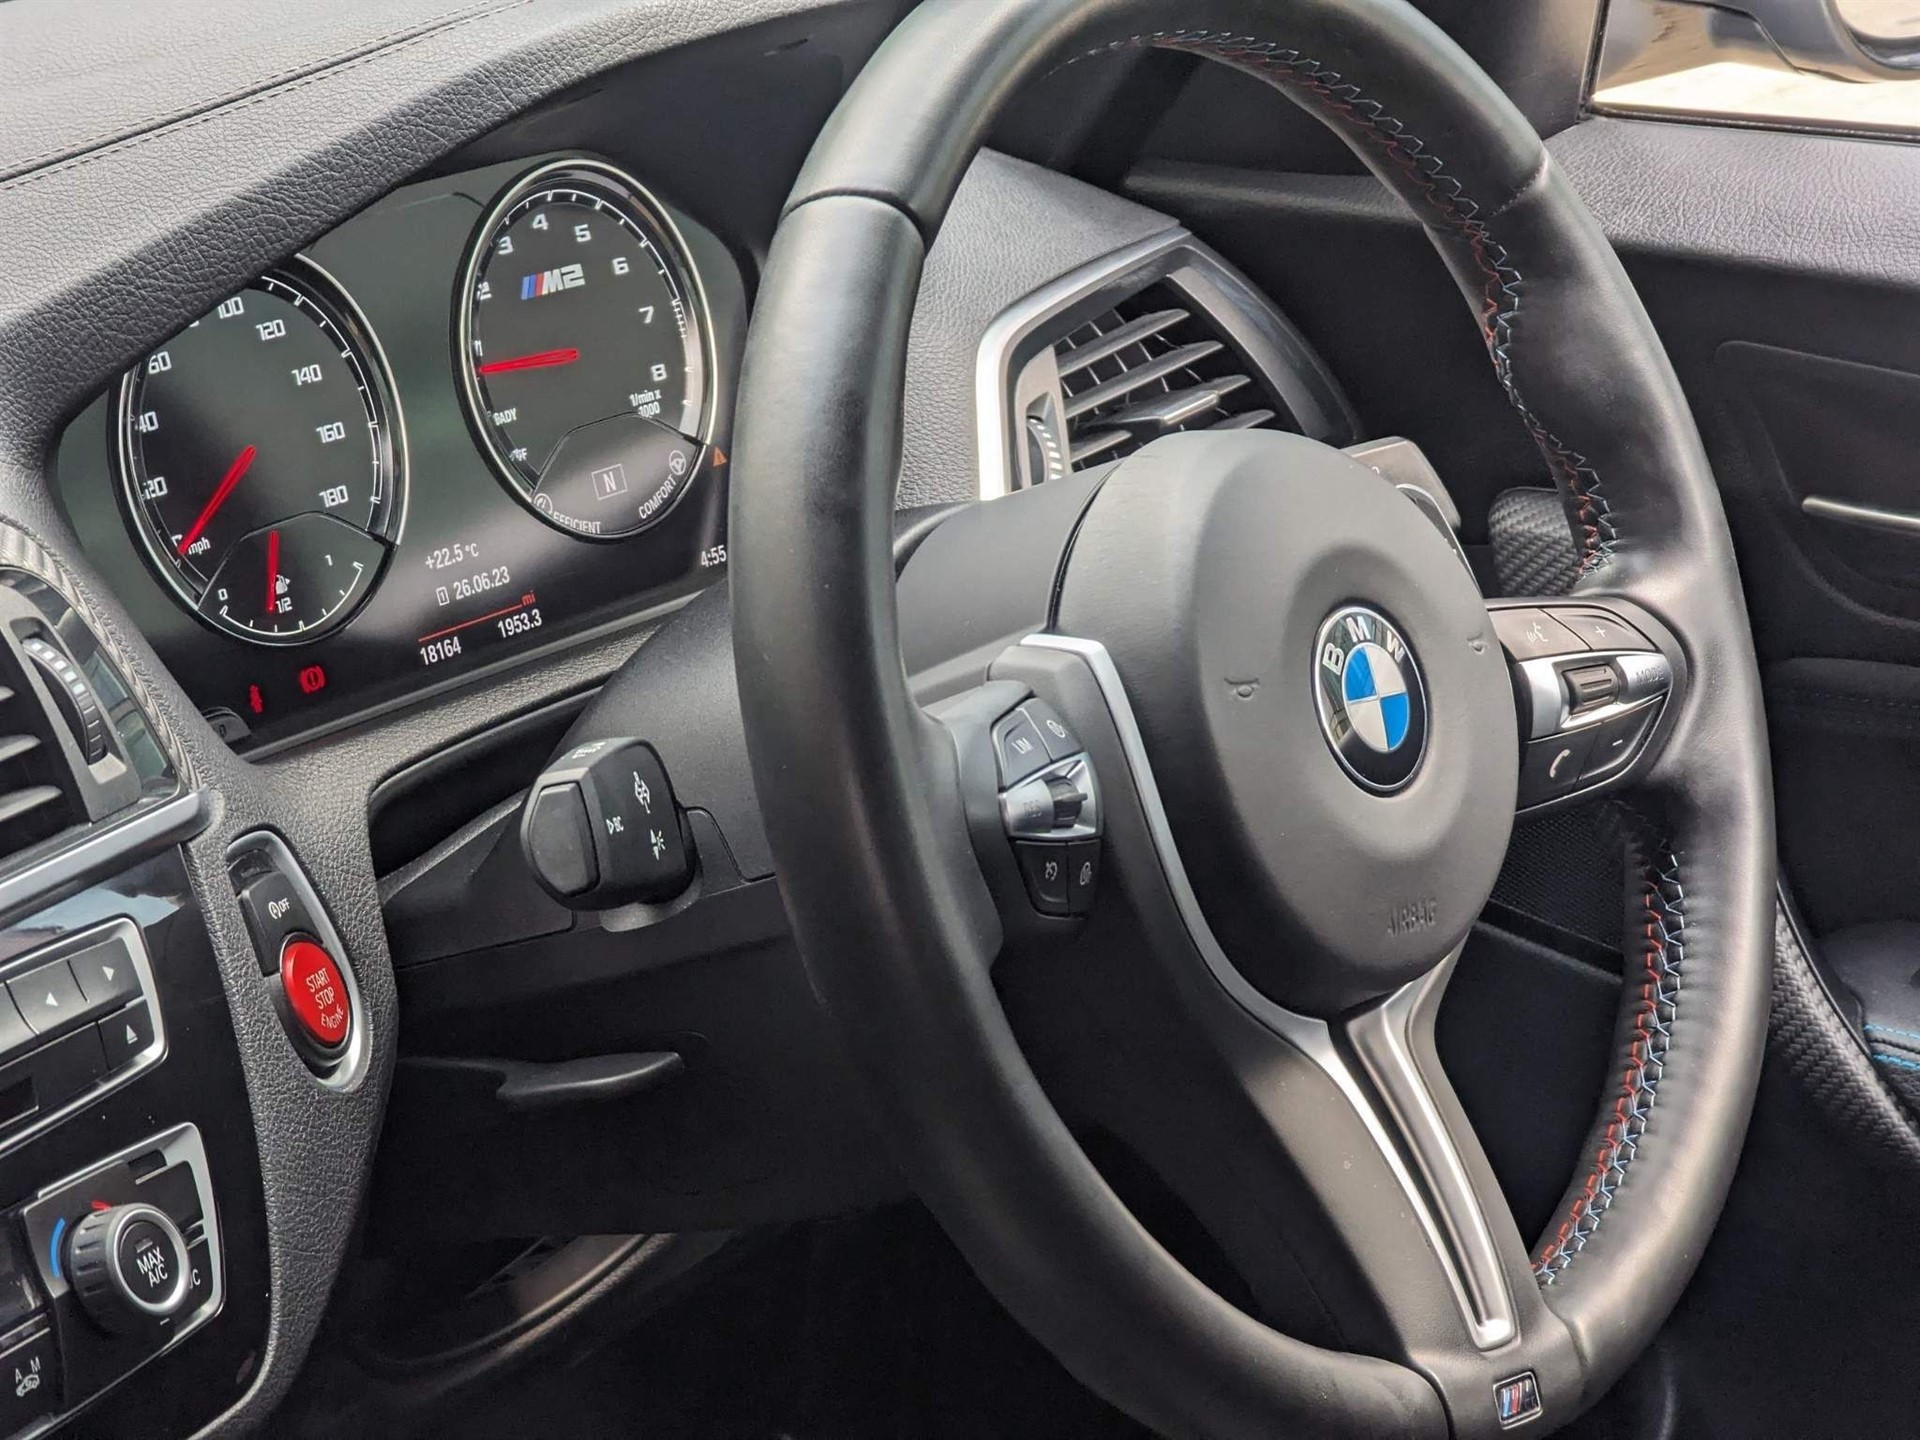 Used BMW M2 for sale in Watford, Hertfordshire